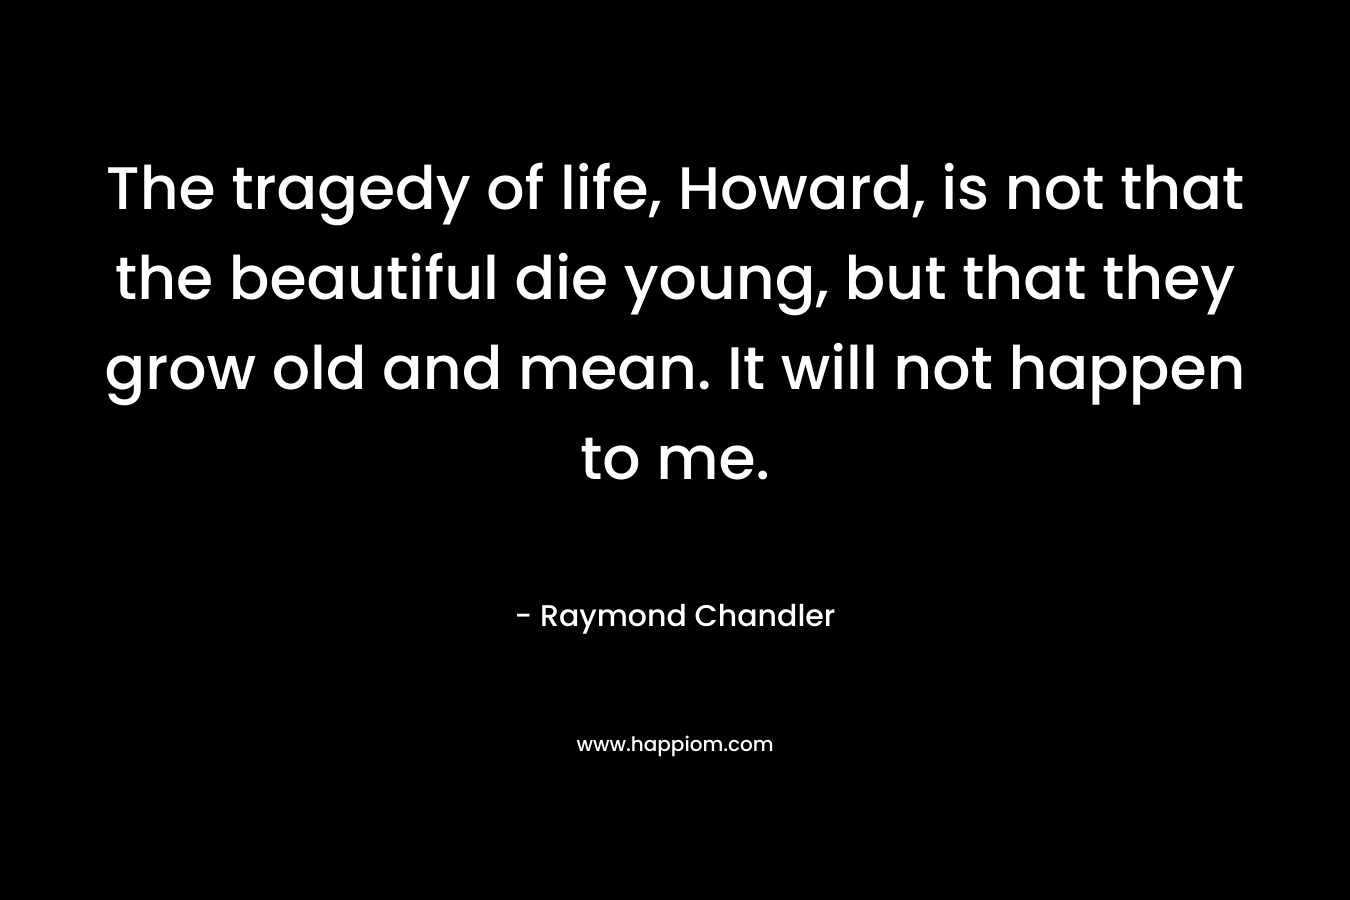 The tragedy of life, Howard, is not that the beautiful die young, but that they grow old and mean. It will not happen to me. – Raymond Chandler